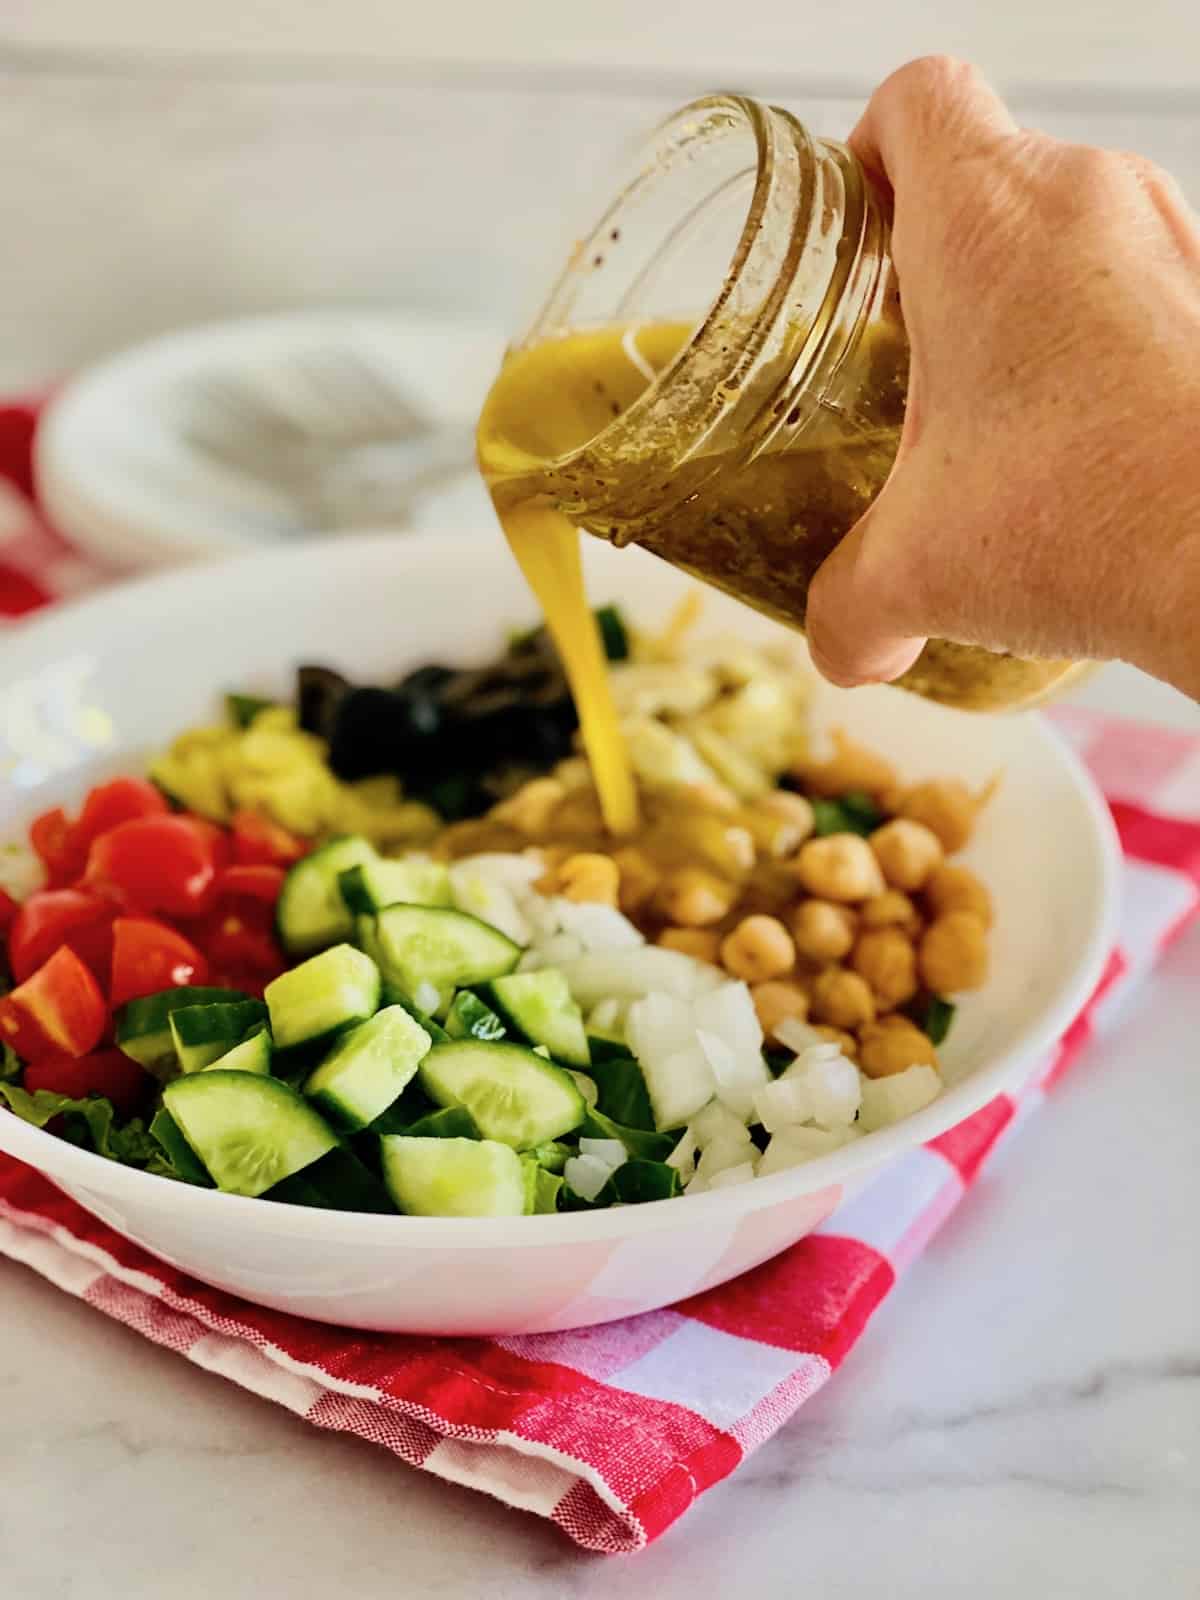 Hand pouring vegan italian dressing from a jar onto the bowl of salad.